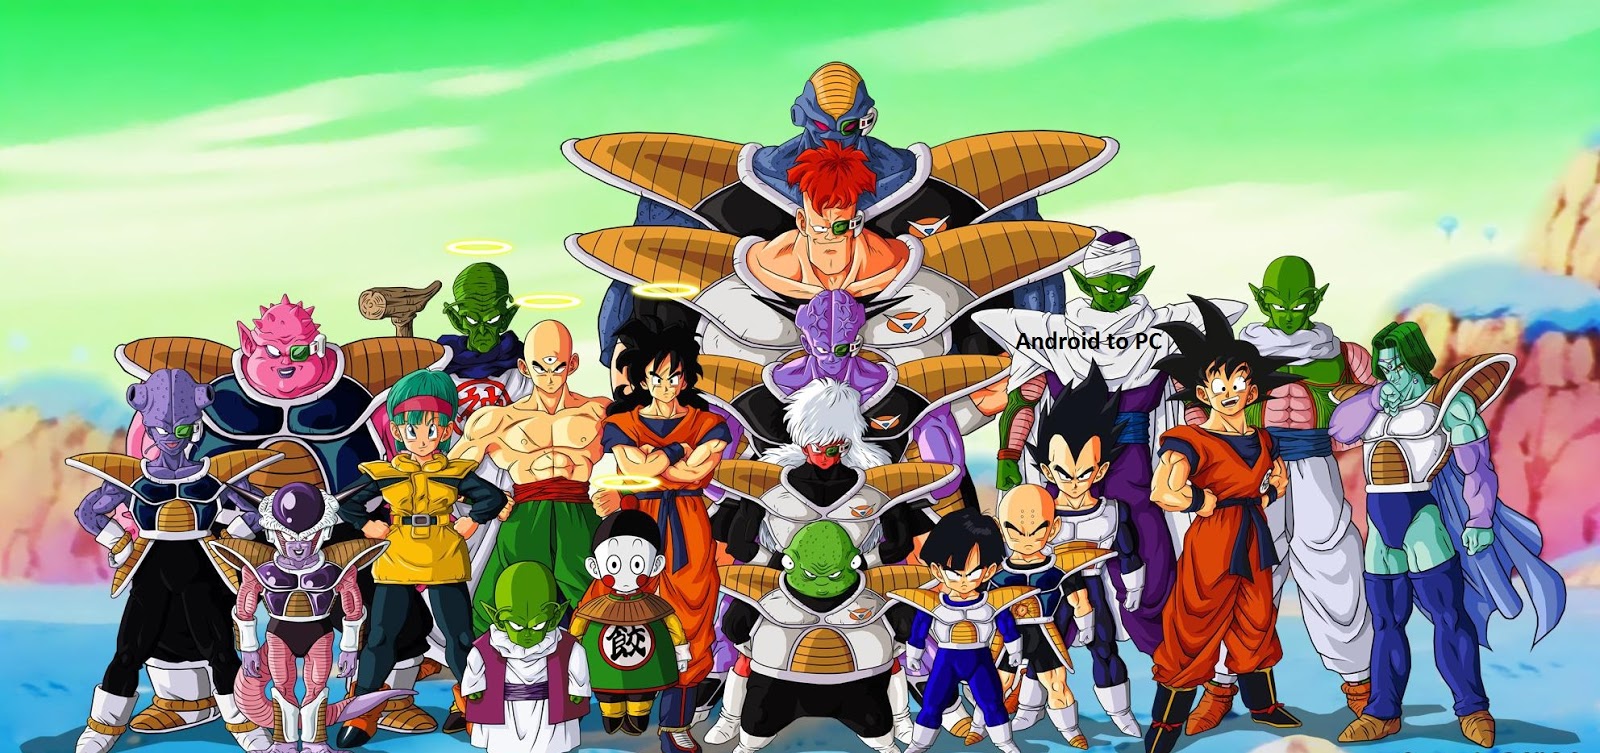 Dragon Ball Z all Episodes Watch Online HD Streaming - Android to PC